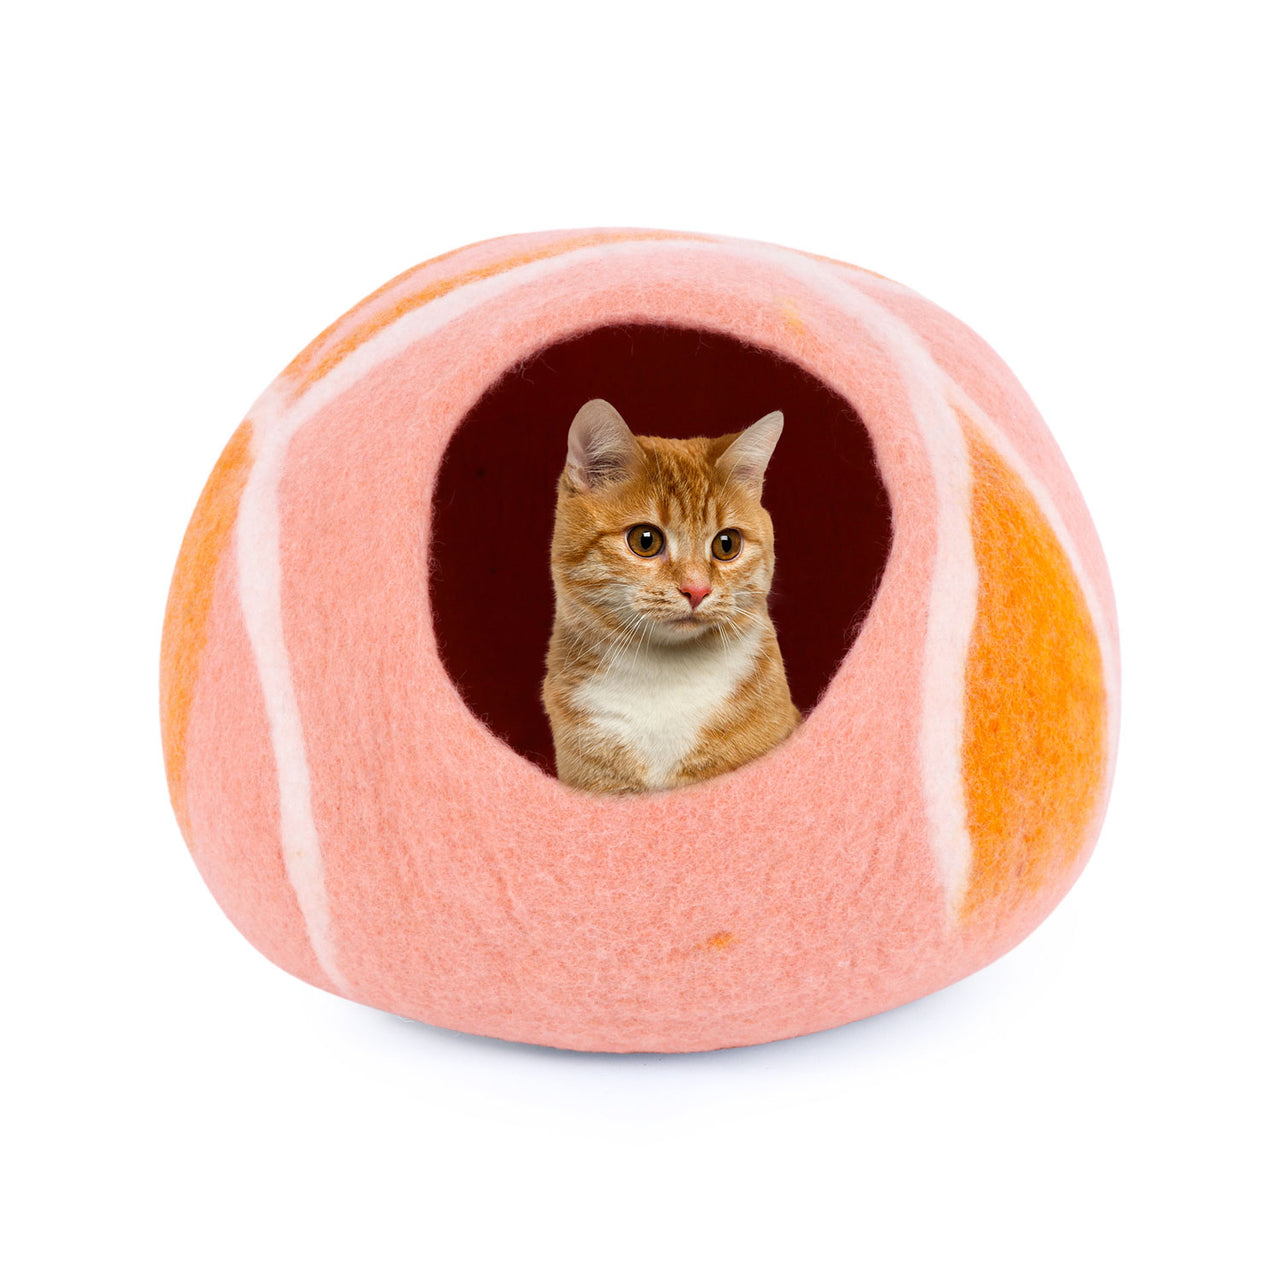 Felt and Wool Felt Cat cave Bed and House for Indoor Kittens Ecm 100% Natural Merino Wool Extremely Cozy and Warm.